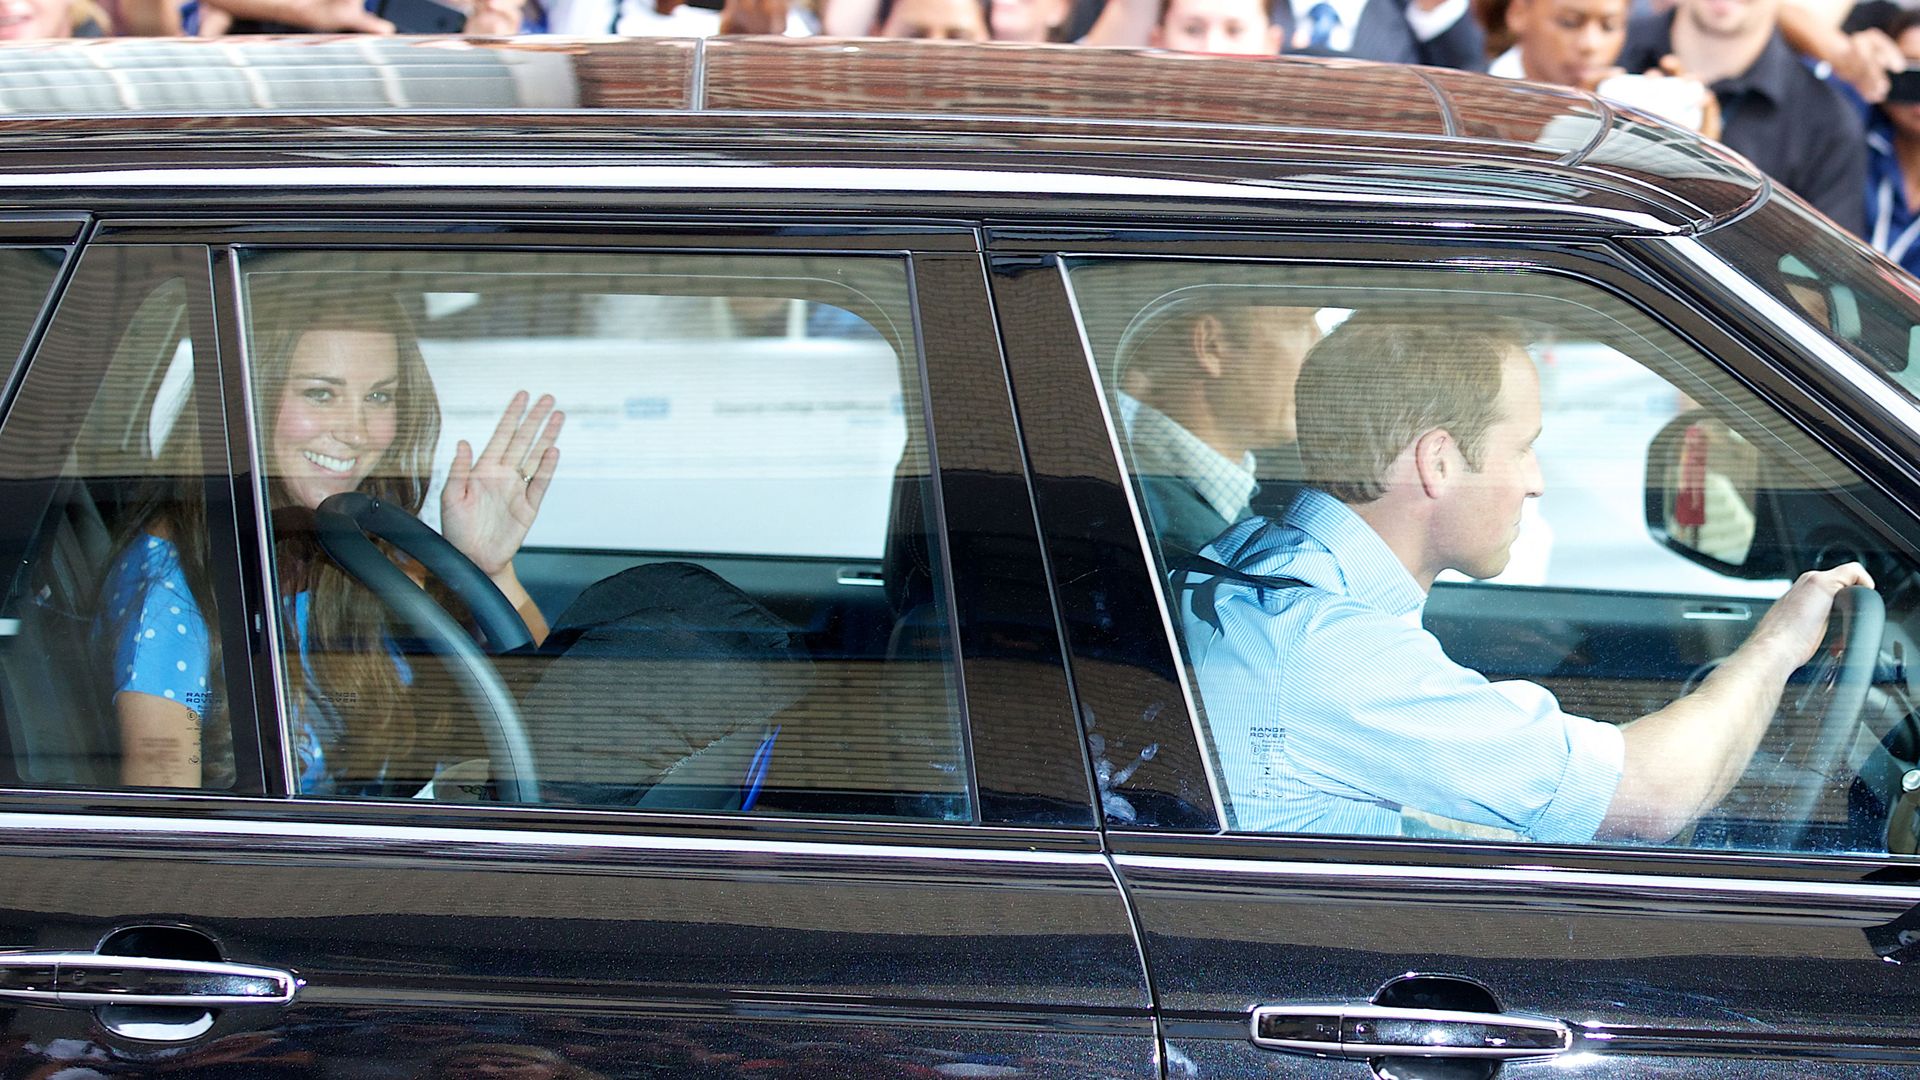 Prince William driving while Kate Middleton sits in the back with Prince George